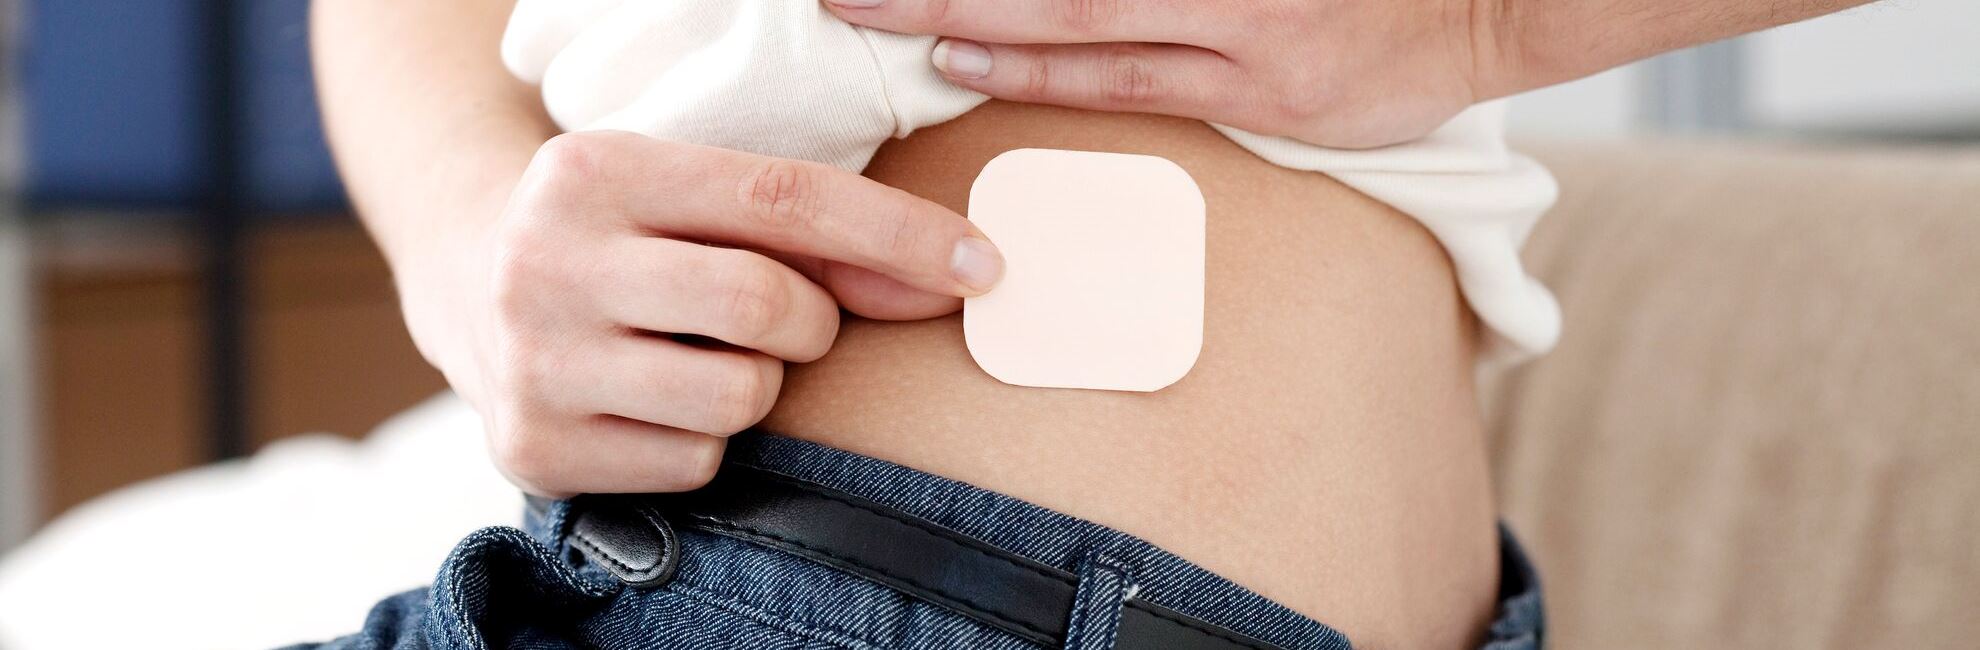 Transdermal Patches: Convenient, but Use with Caution